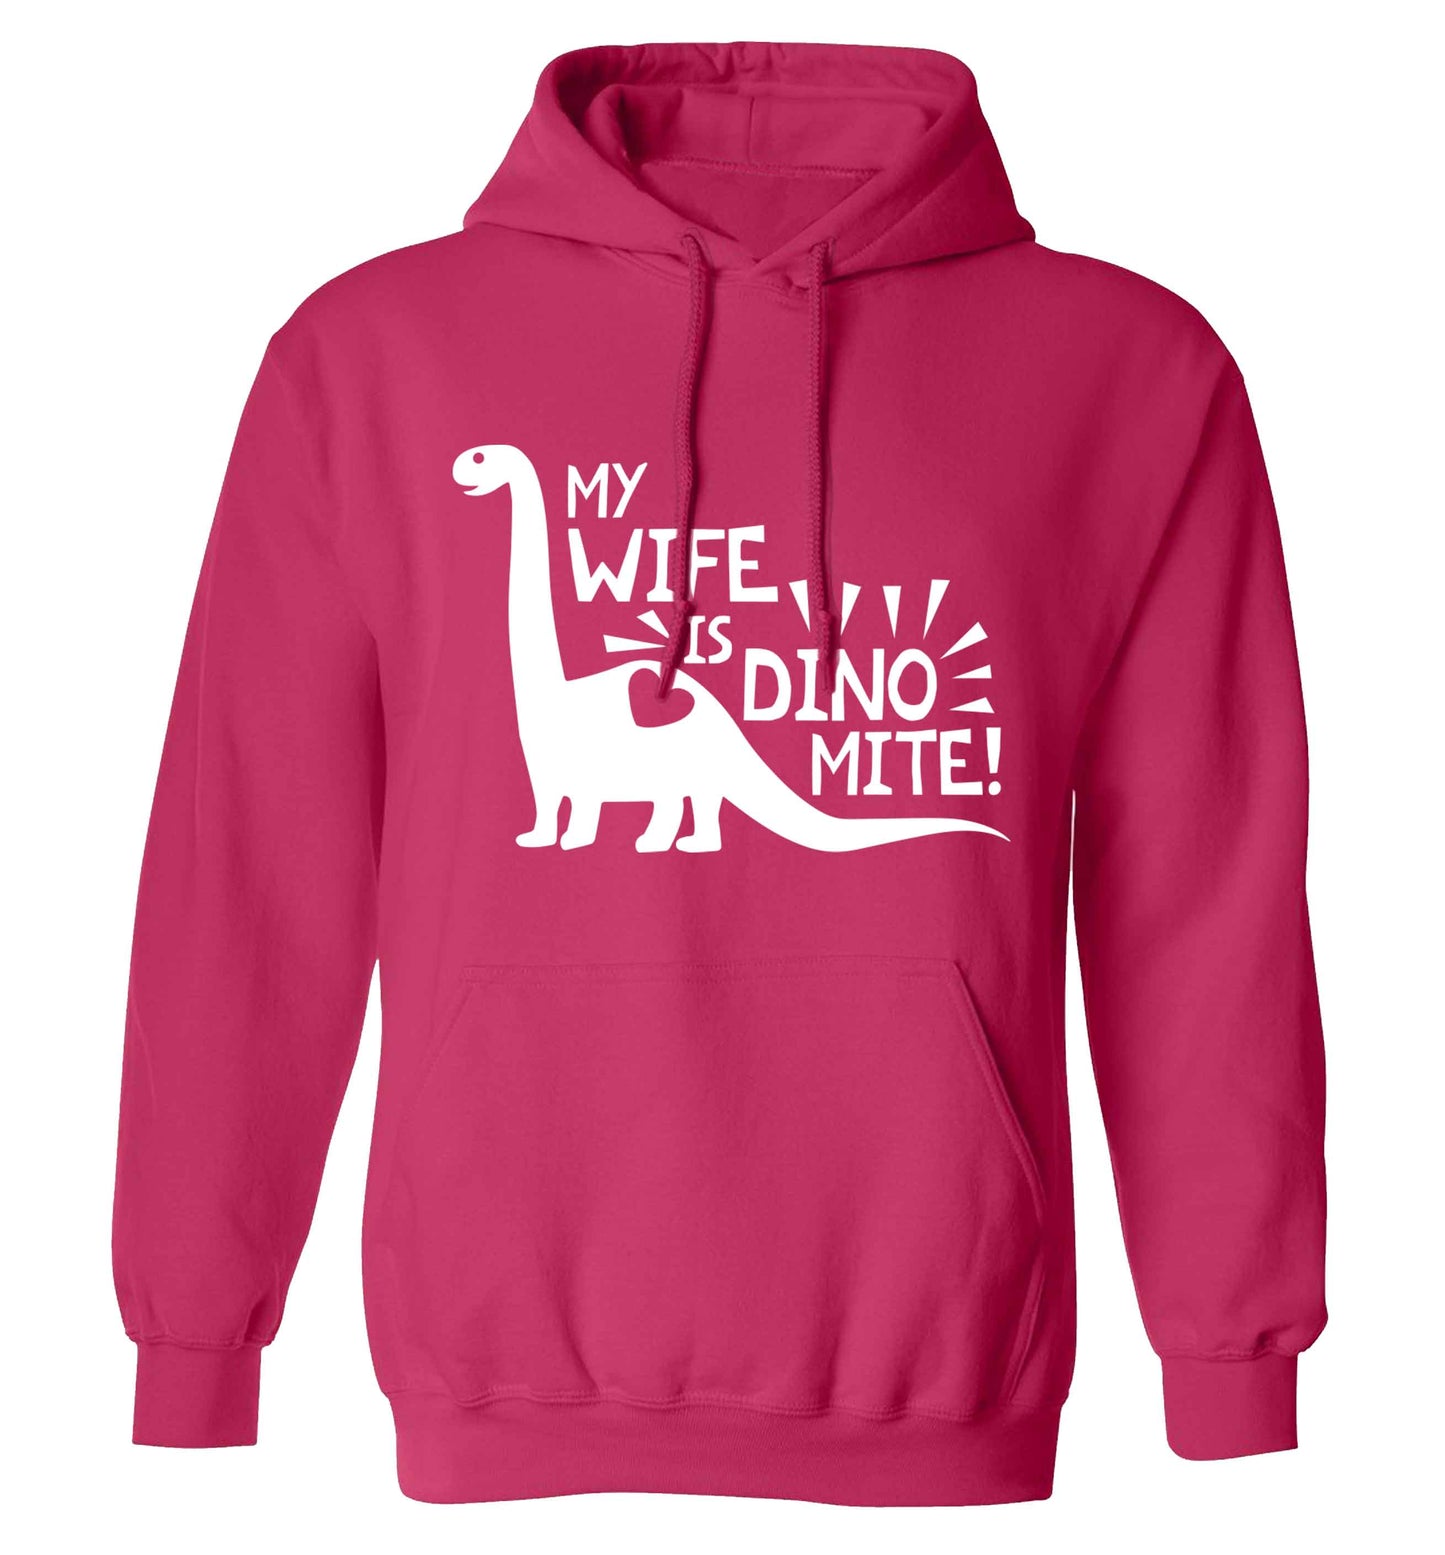 My wife is dinomite! adults unisex pink hoodie 2XL